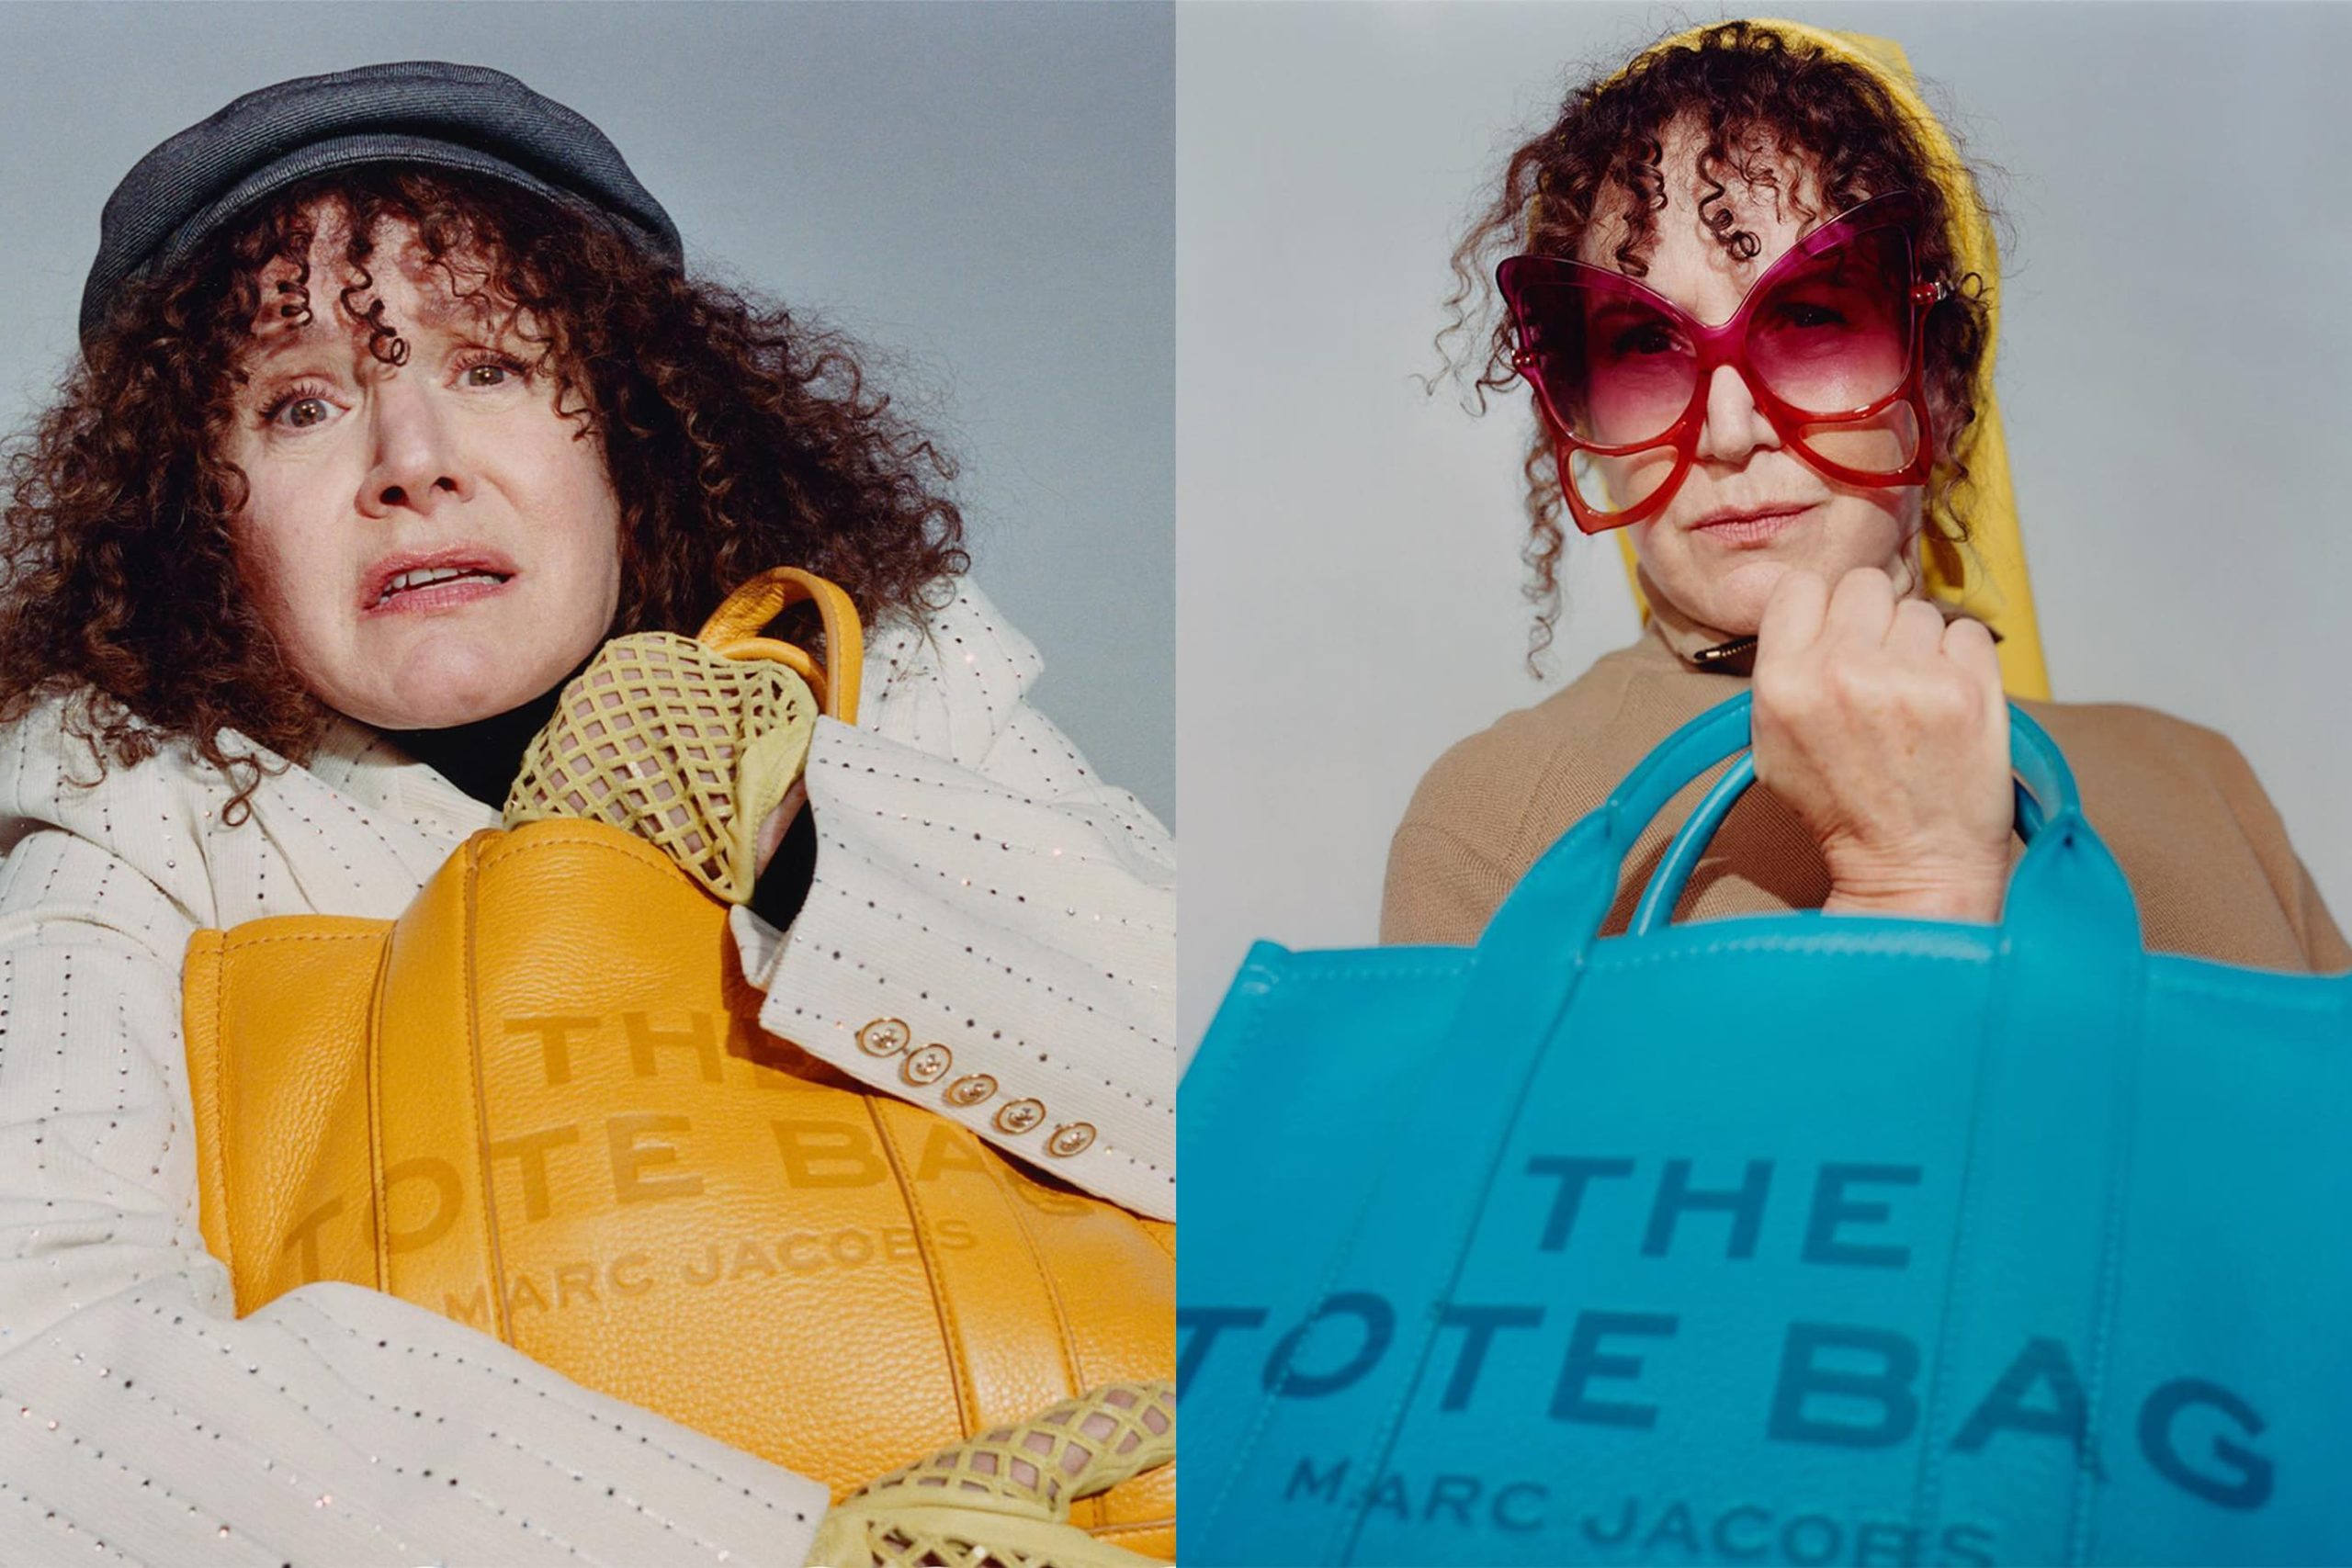 Marc Jacobs Spring 2022 Ad Campaign